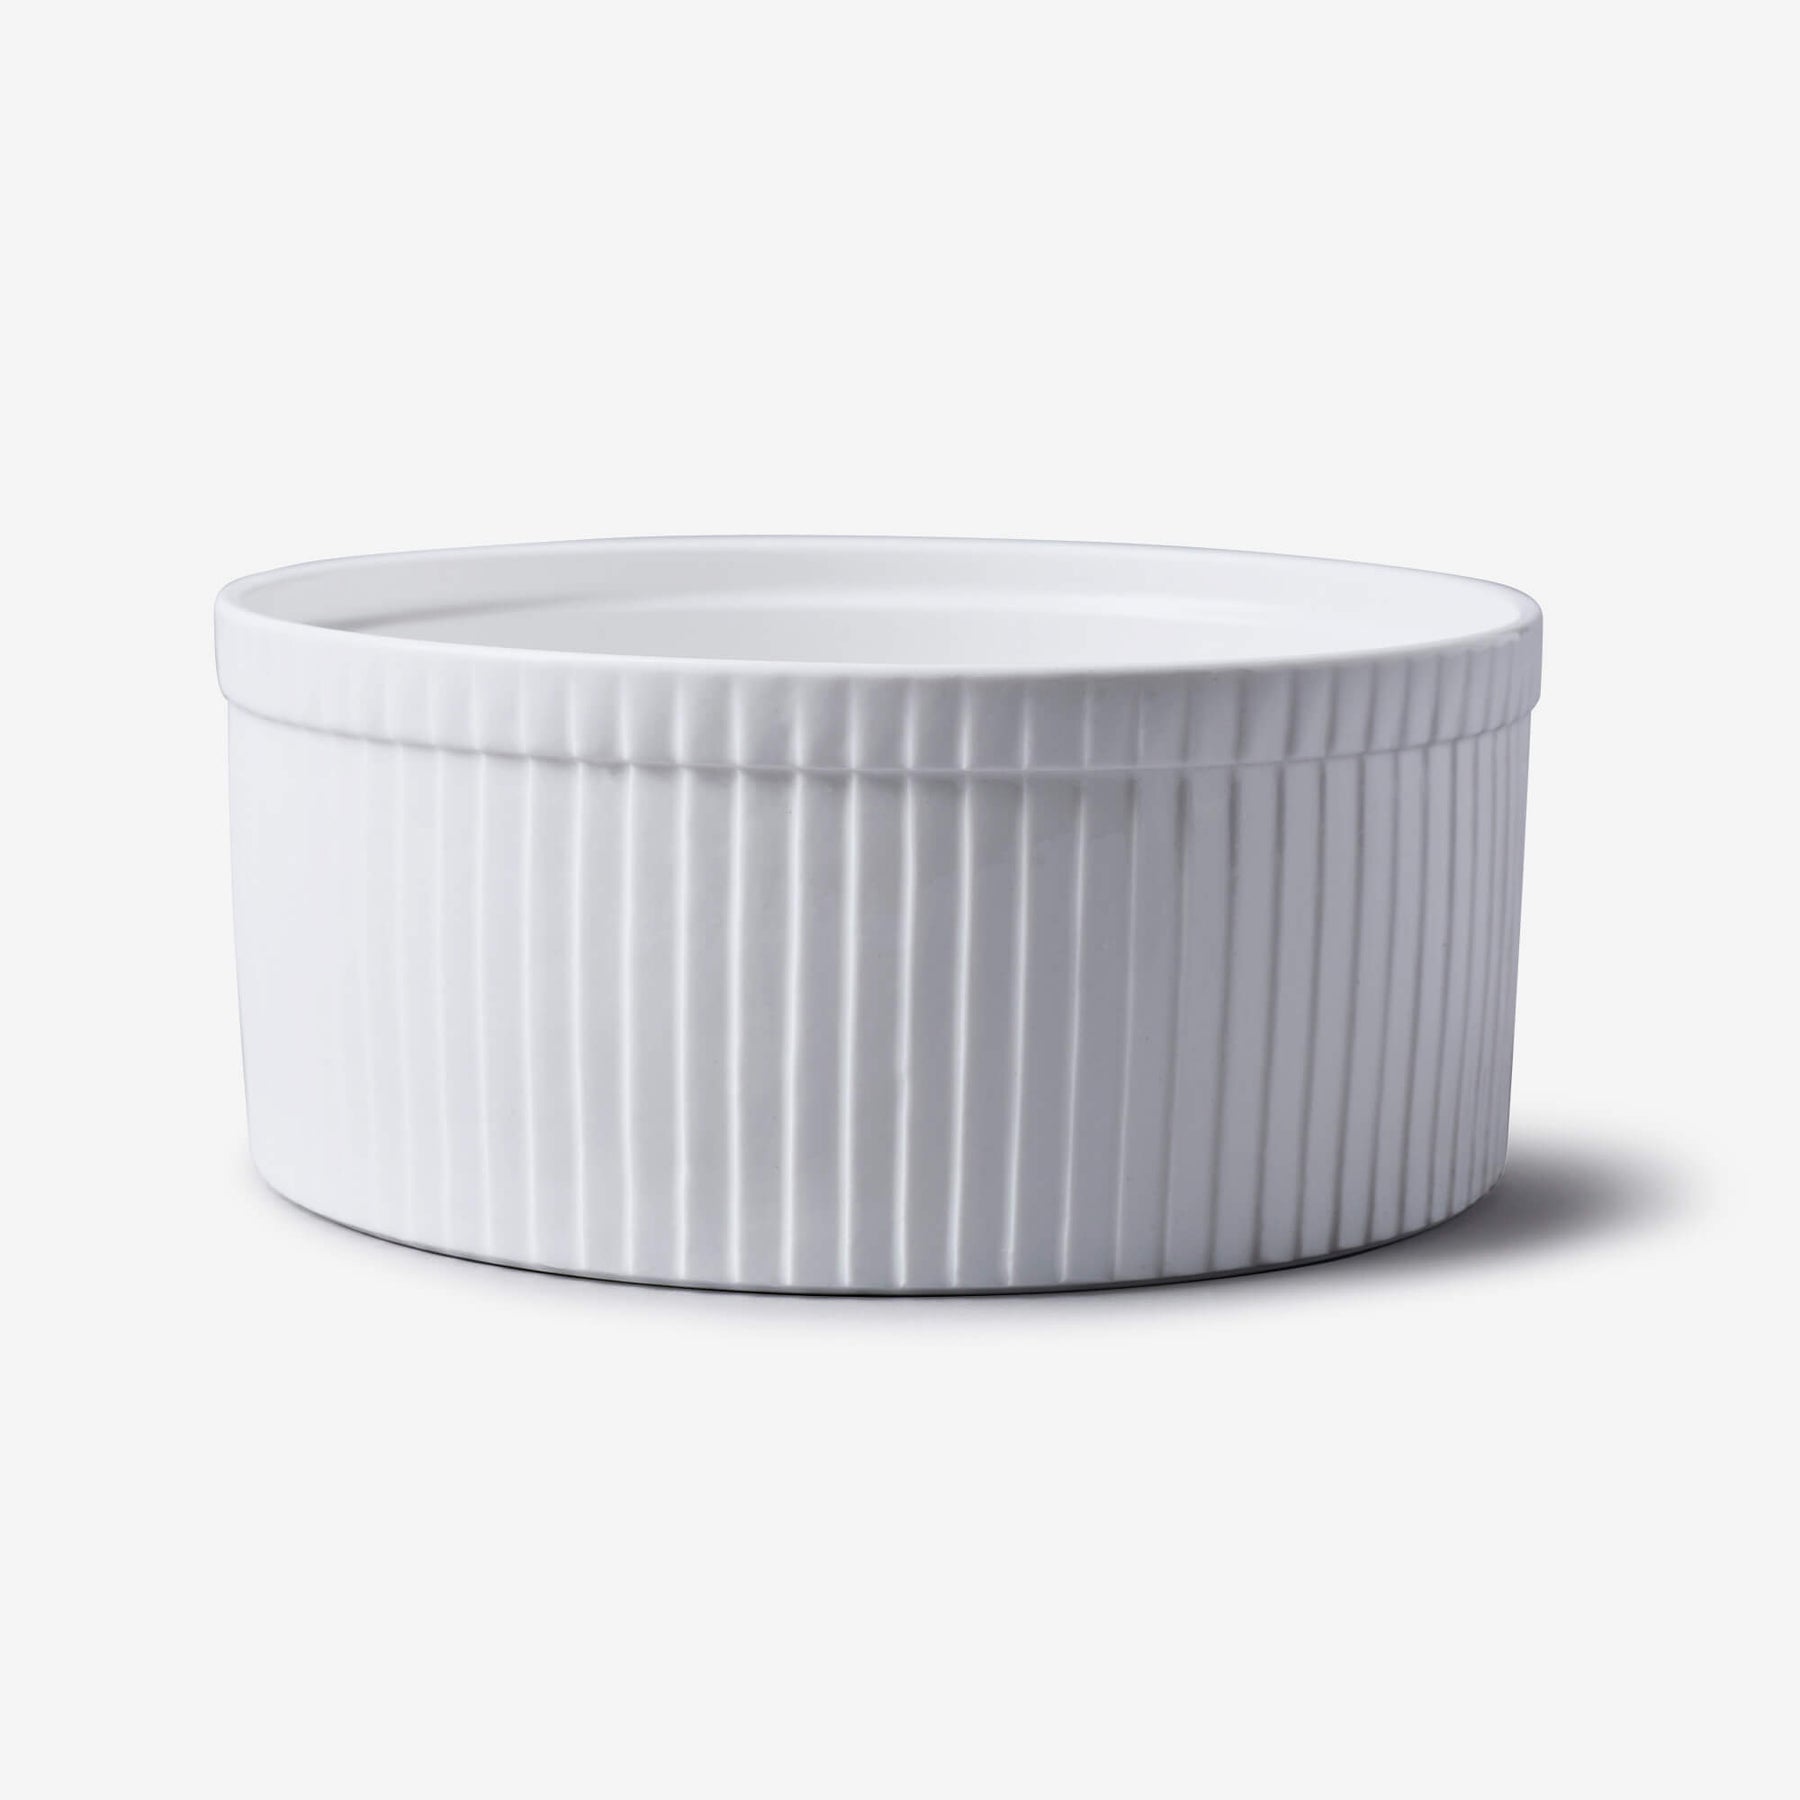 Porcelain Souffle Dish, Available in 3 Sizes